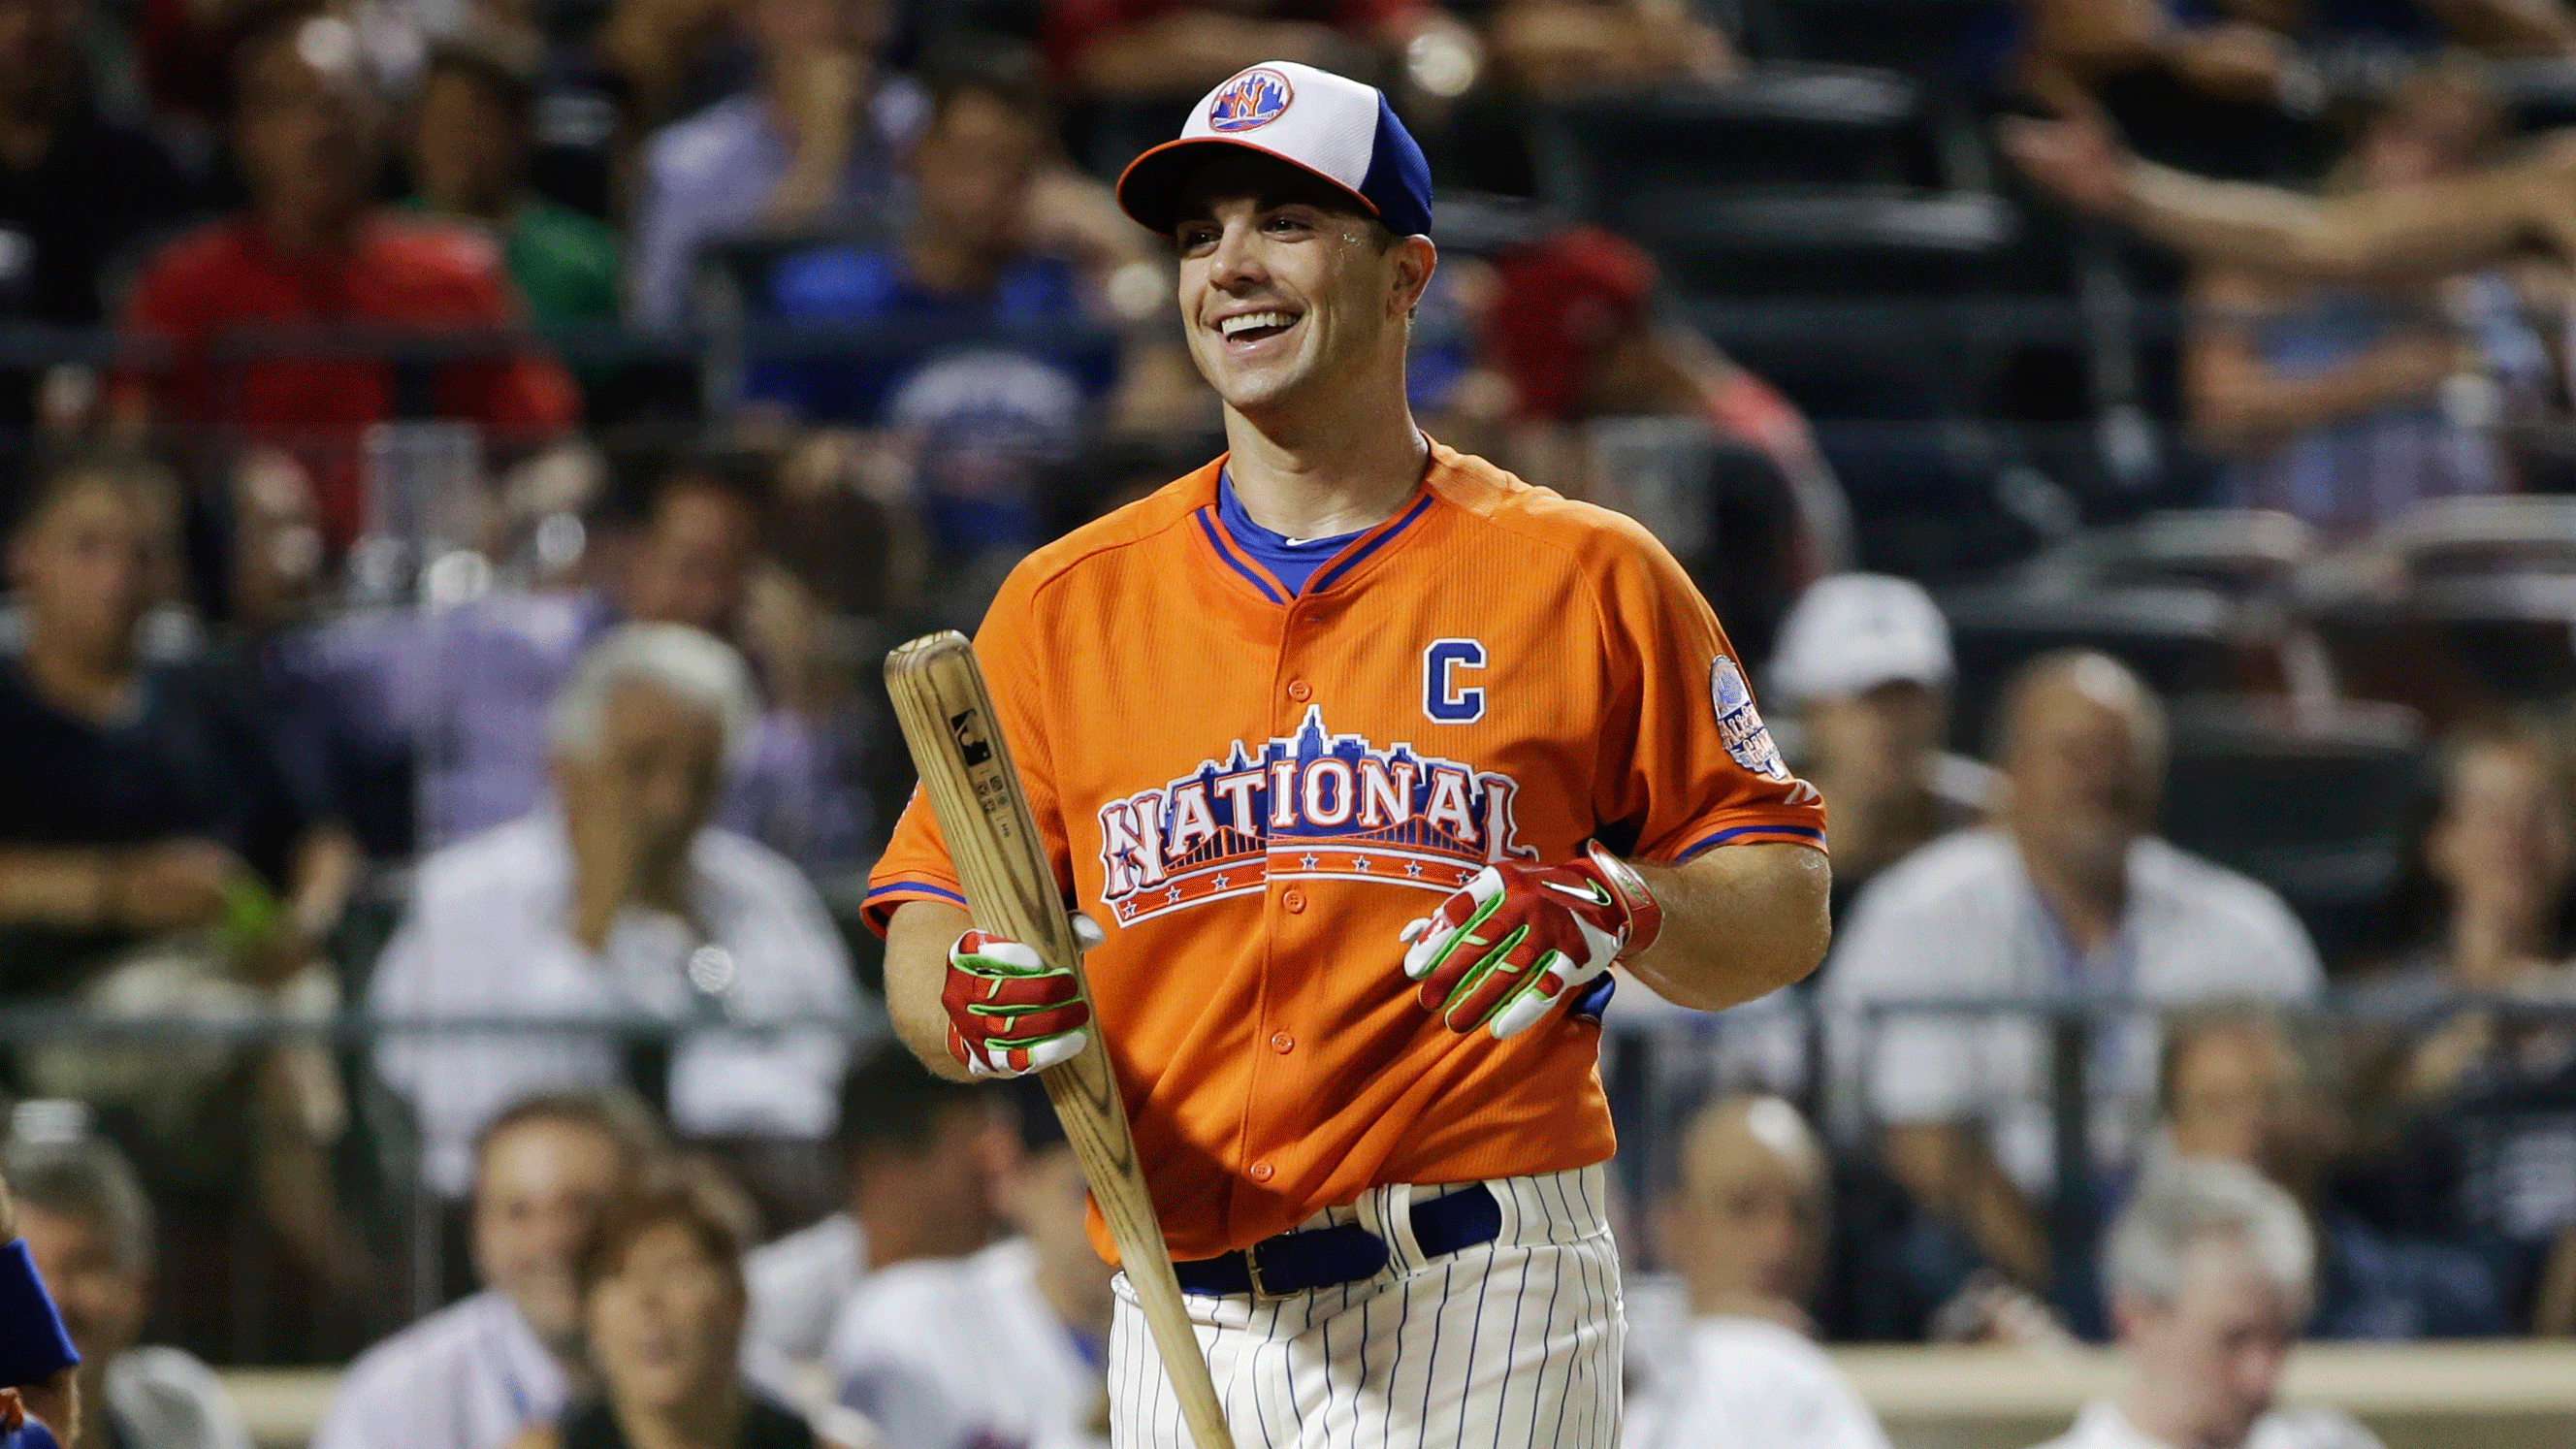 David Wright smiles as he is eliminated from the Derby. (AP/Matt Slocum)